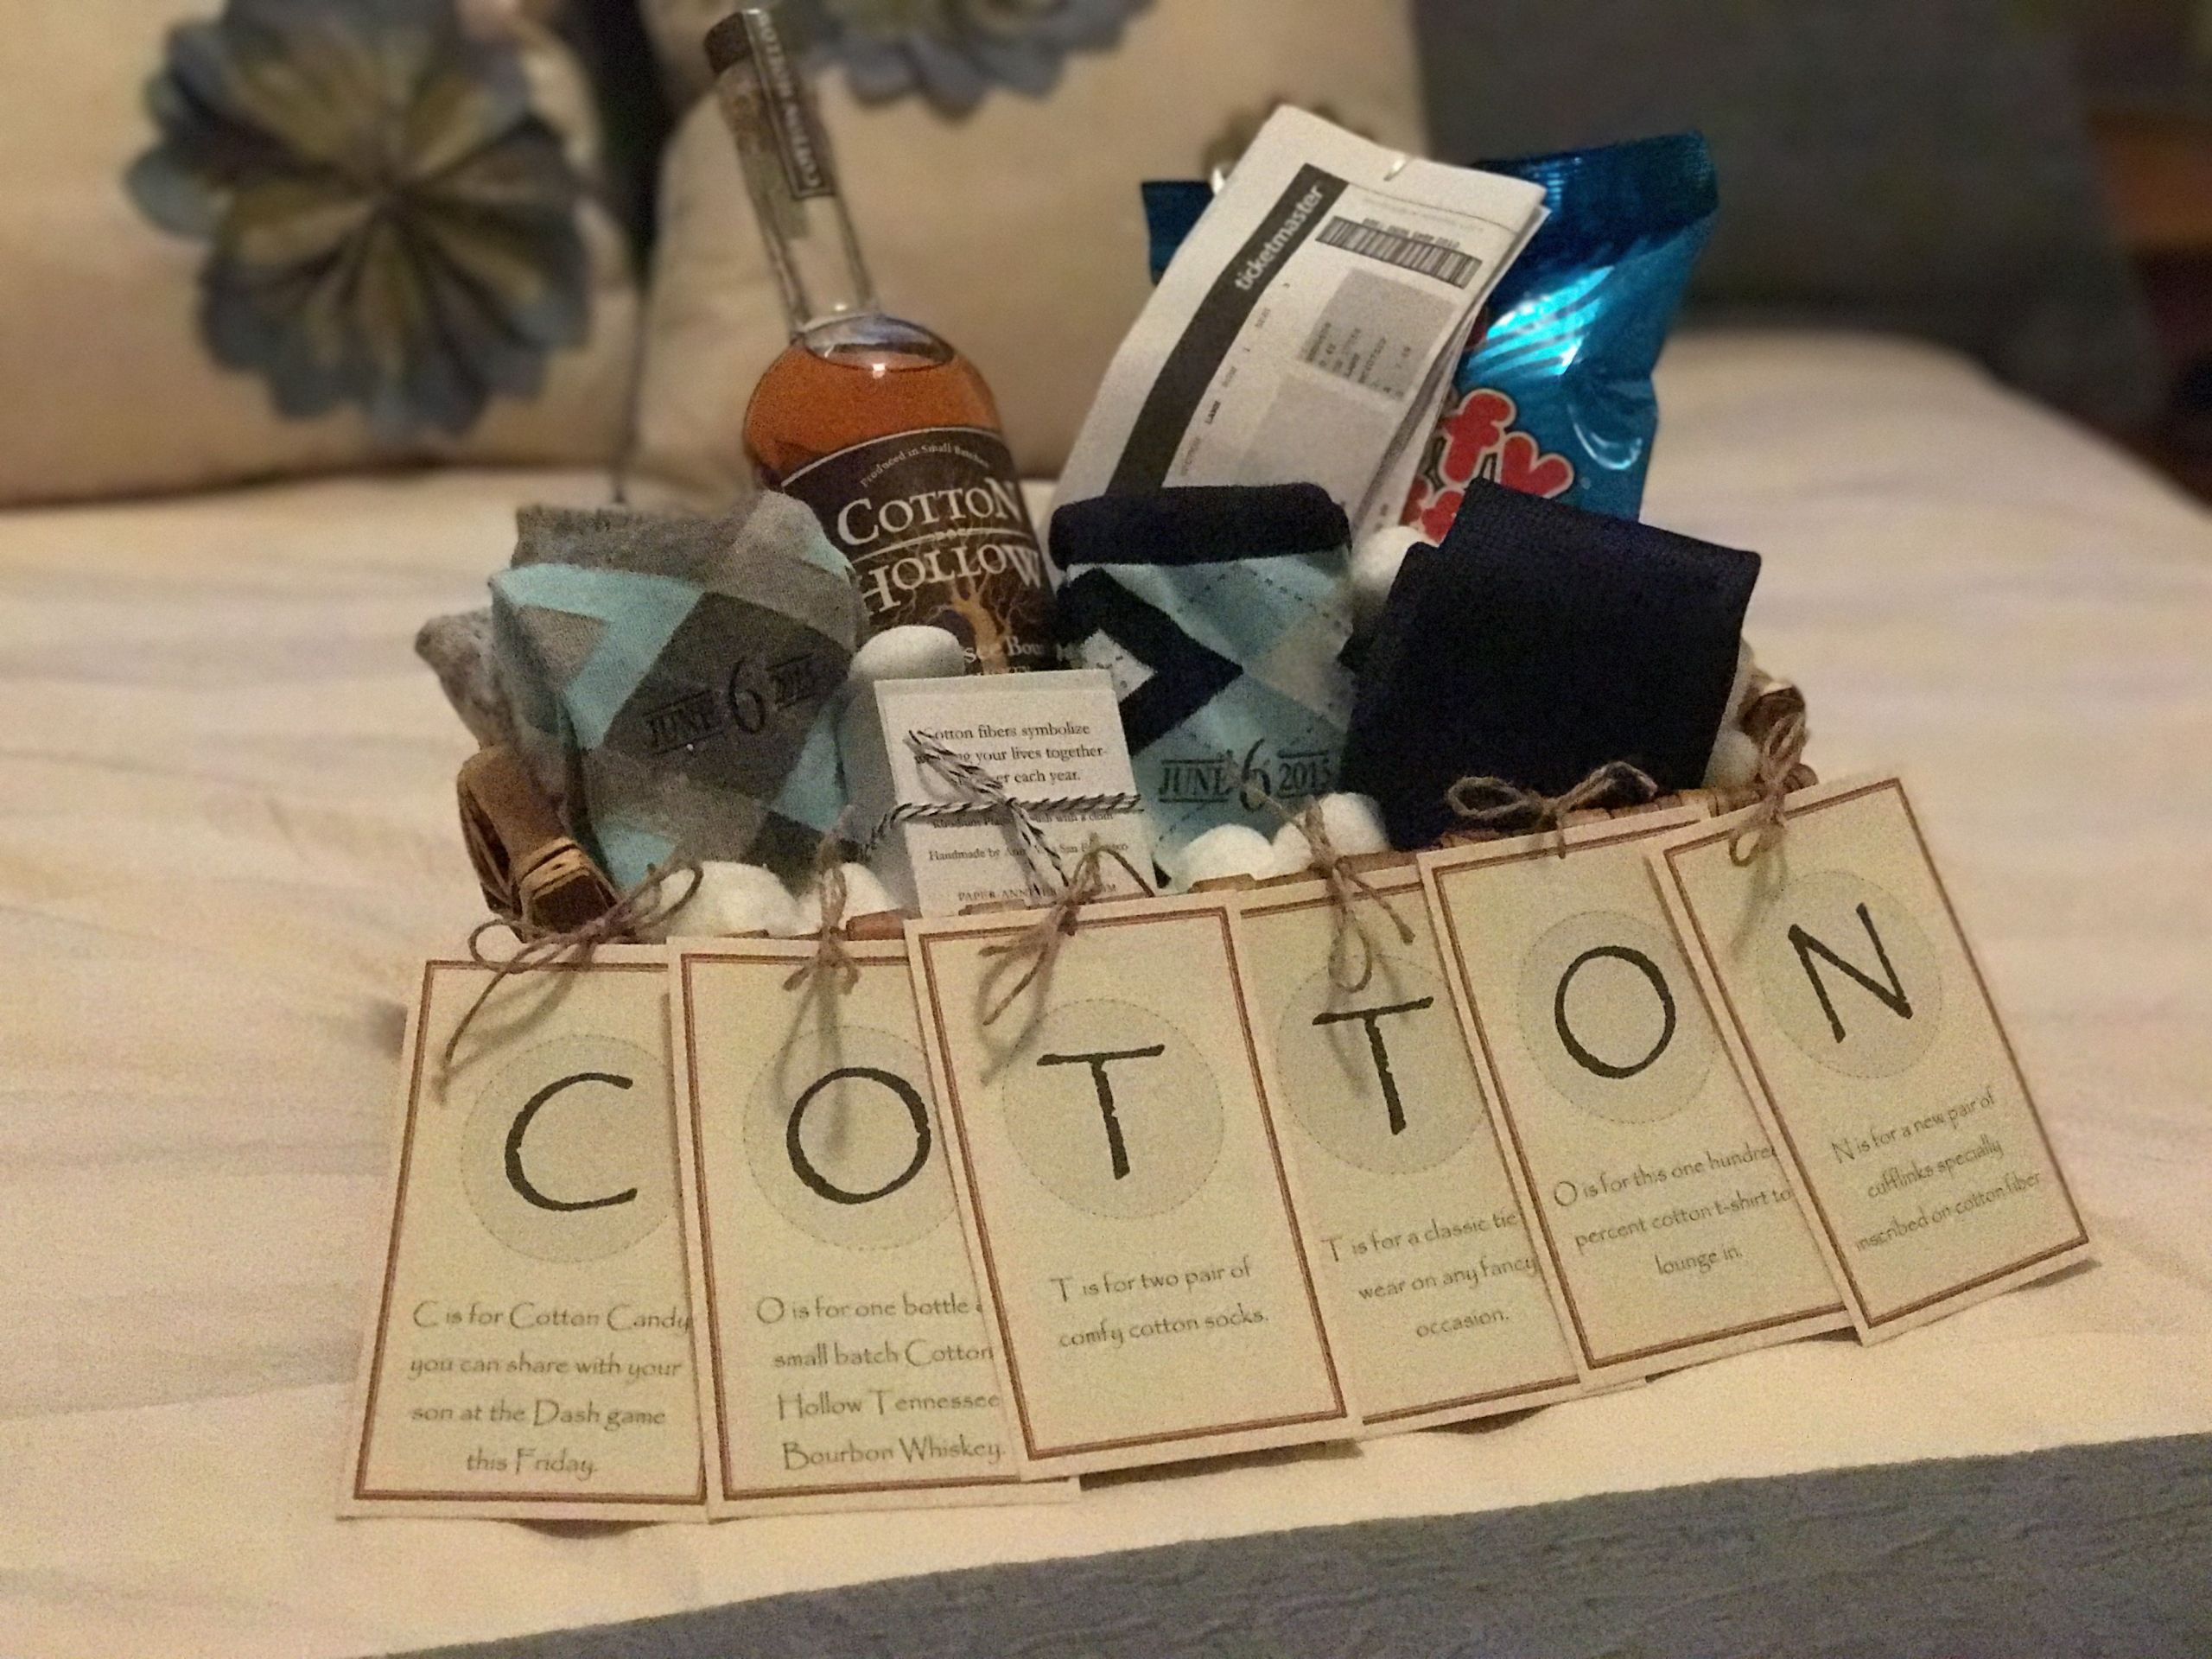 2Nd Year Anniversary Gift Ideas
 The "Cotton" Anniversary Gift for Him